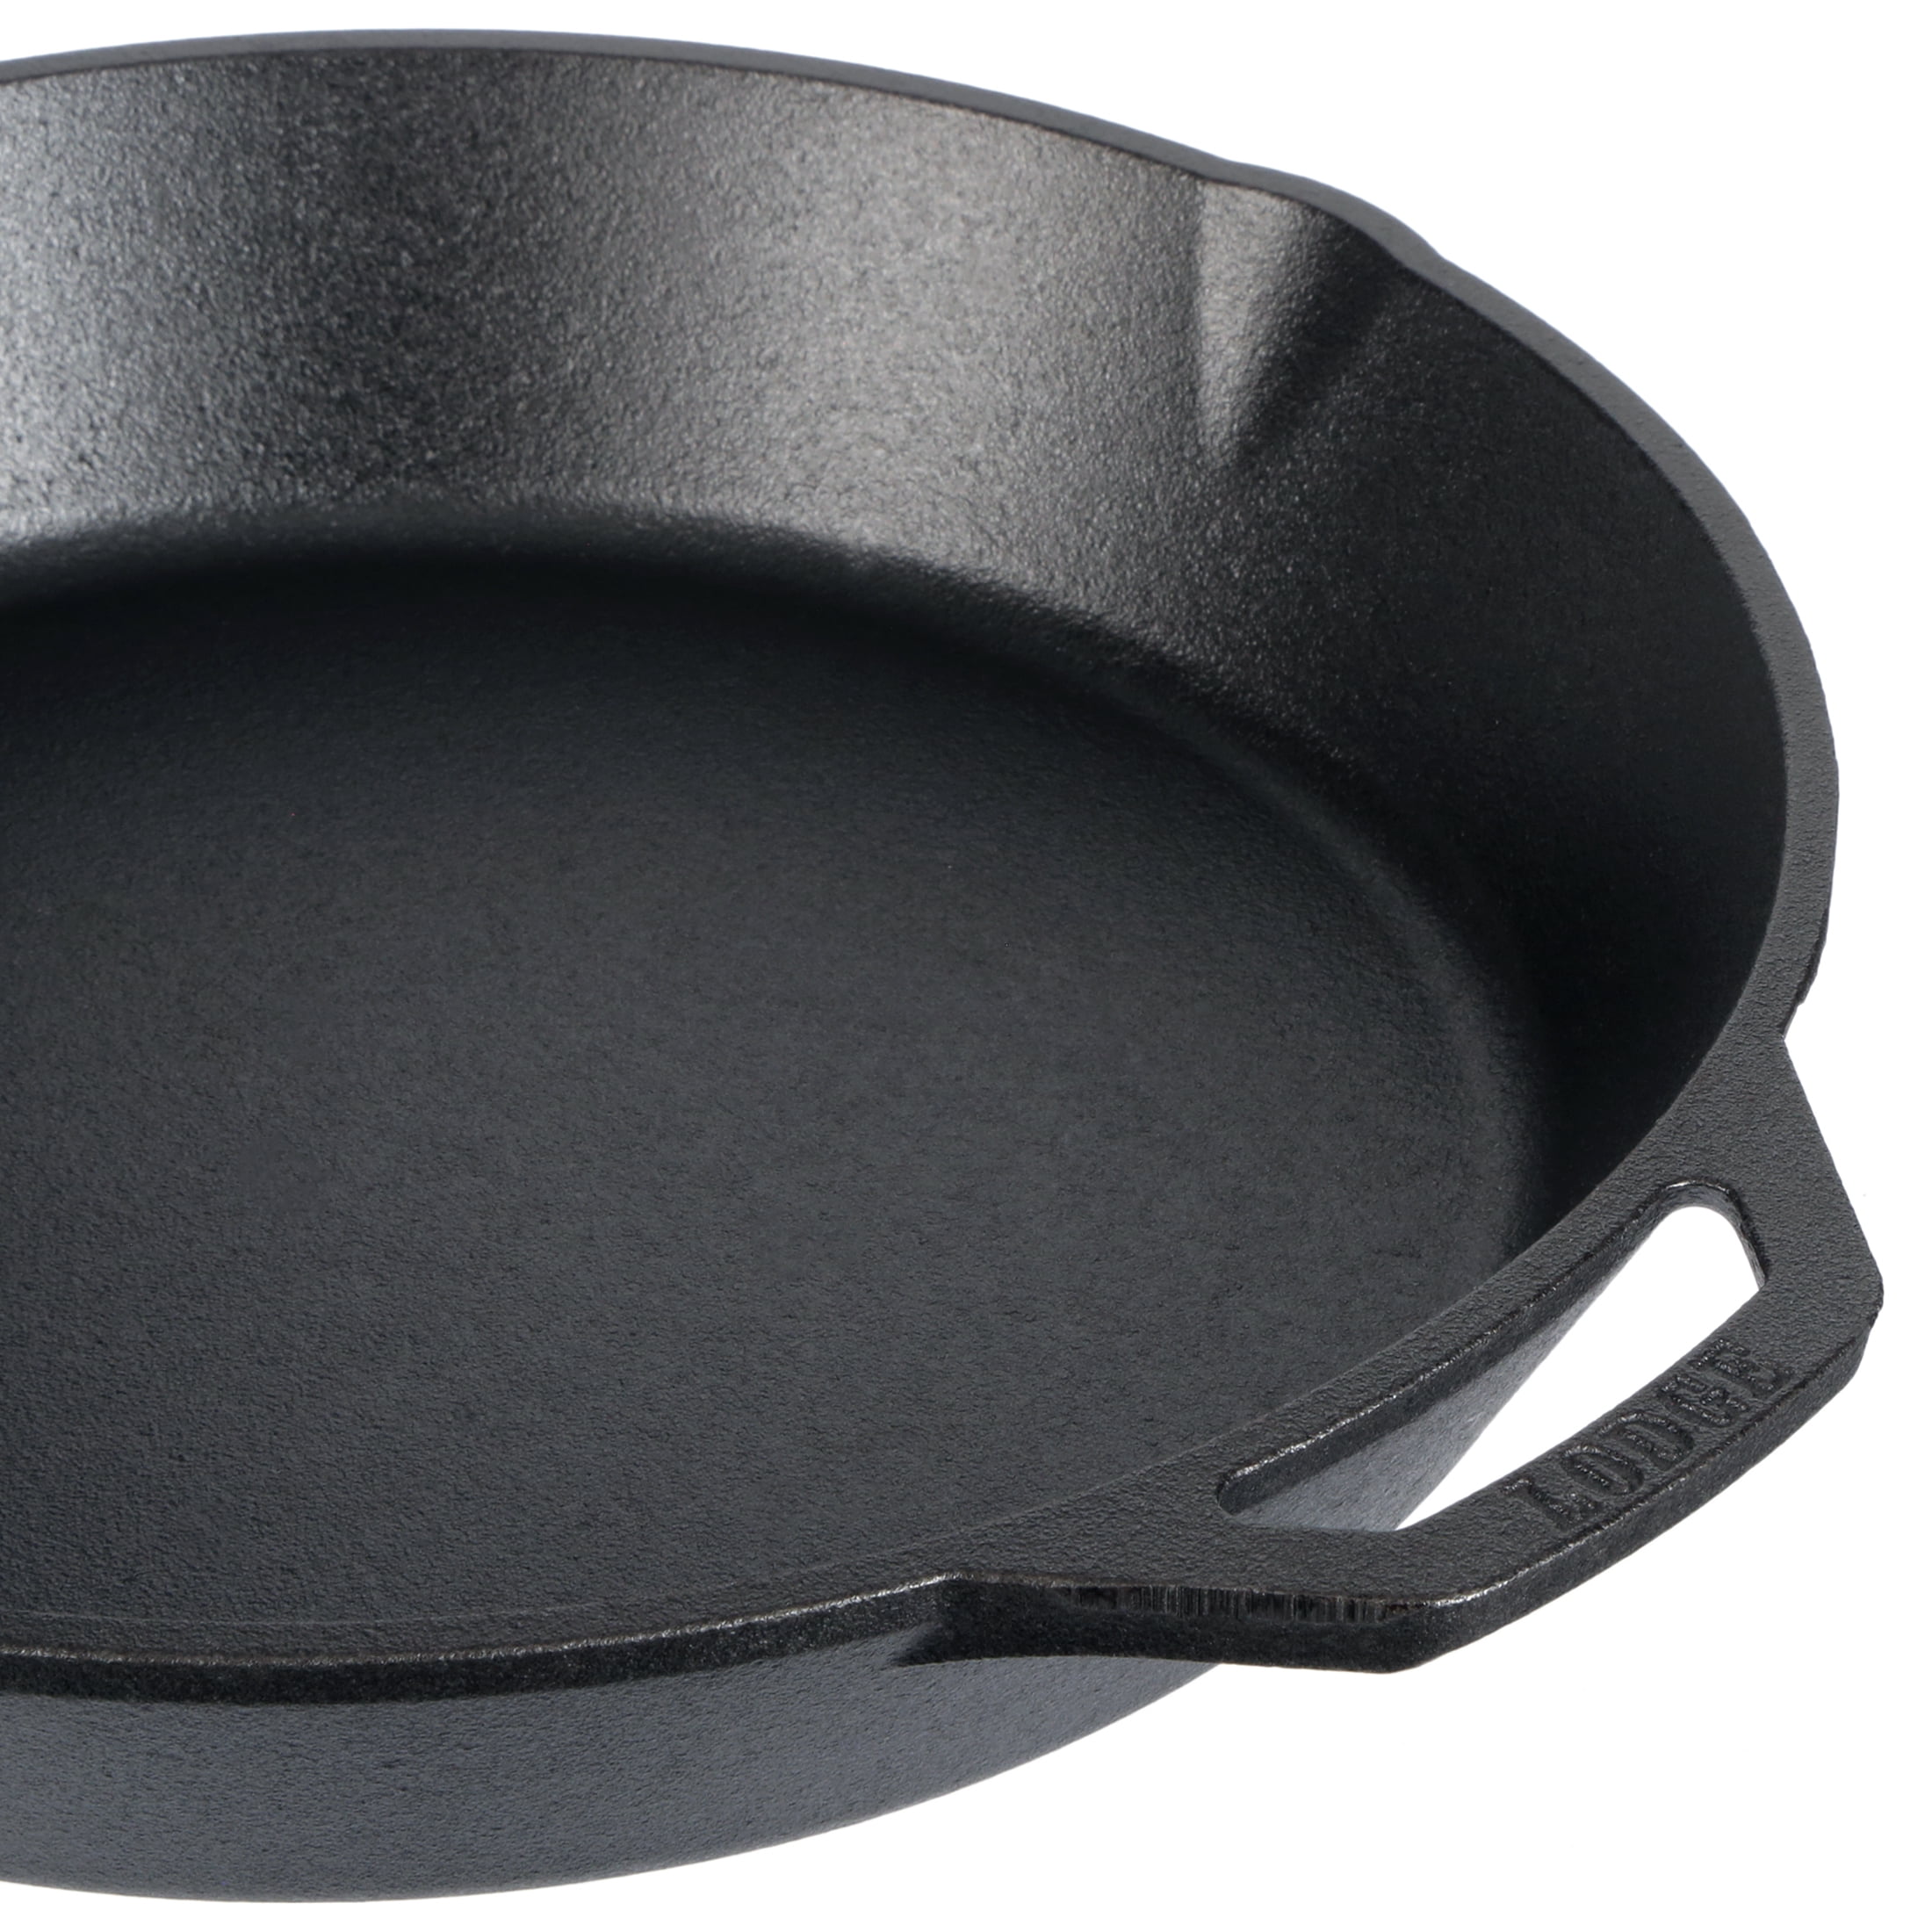 Lodge 2 USA 12SK 13 inch Heavy Cast Iron Frying Pan Camp Skillet